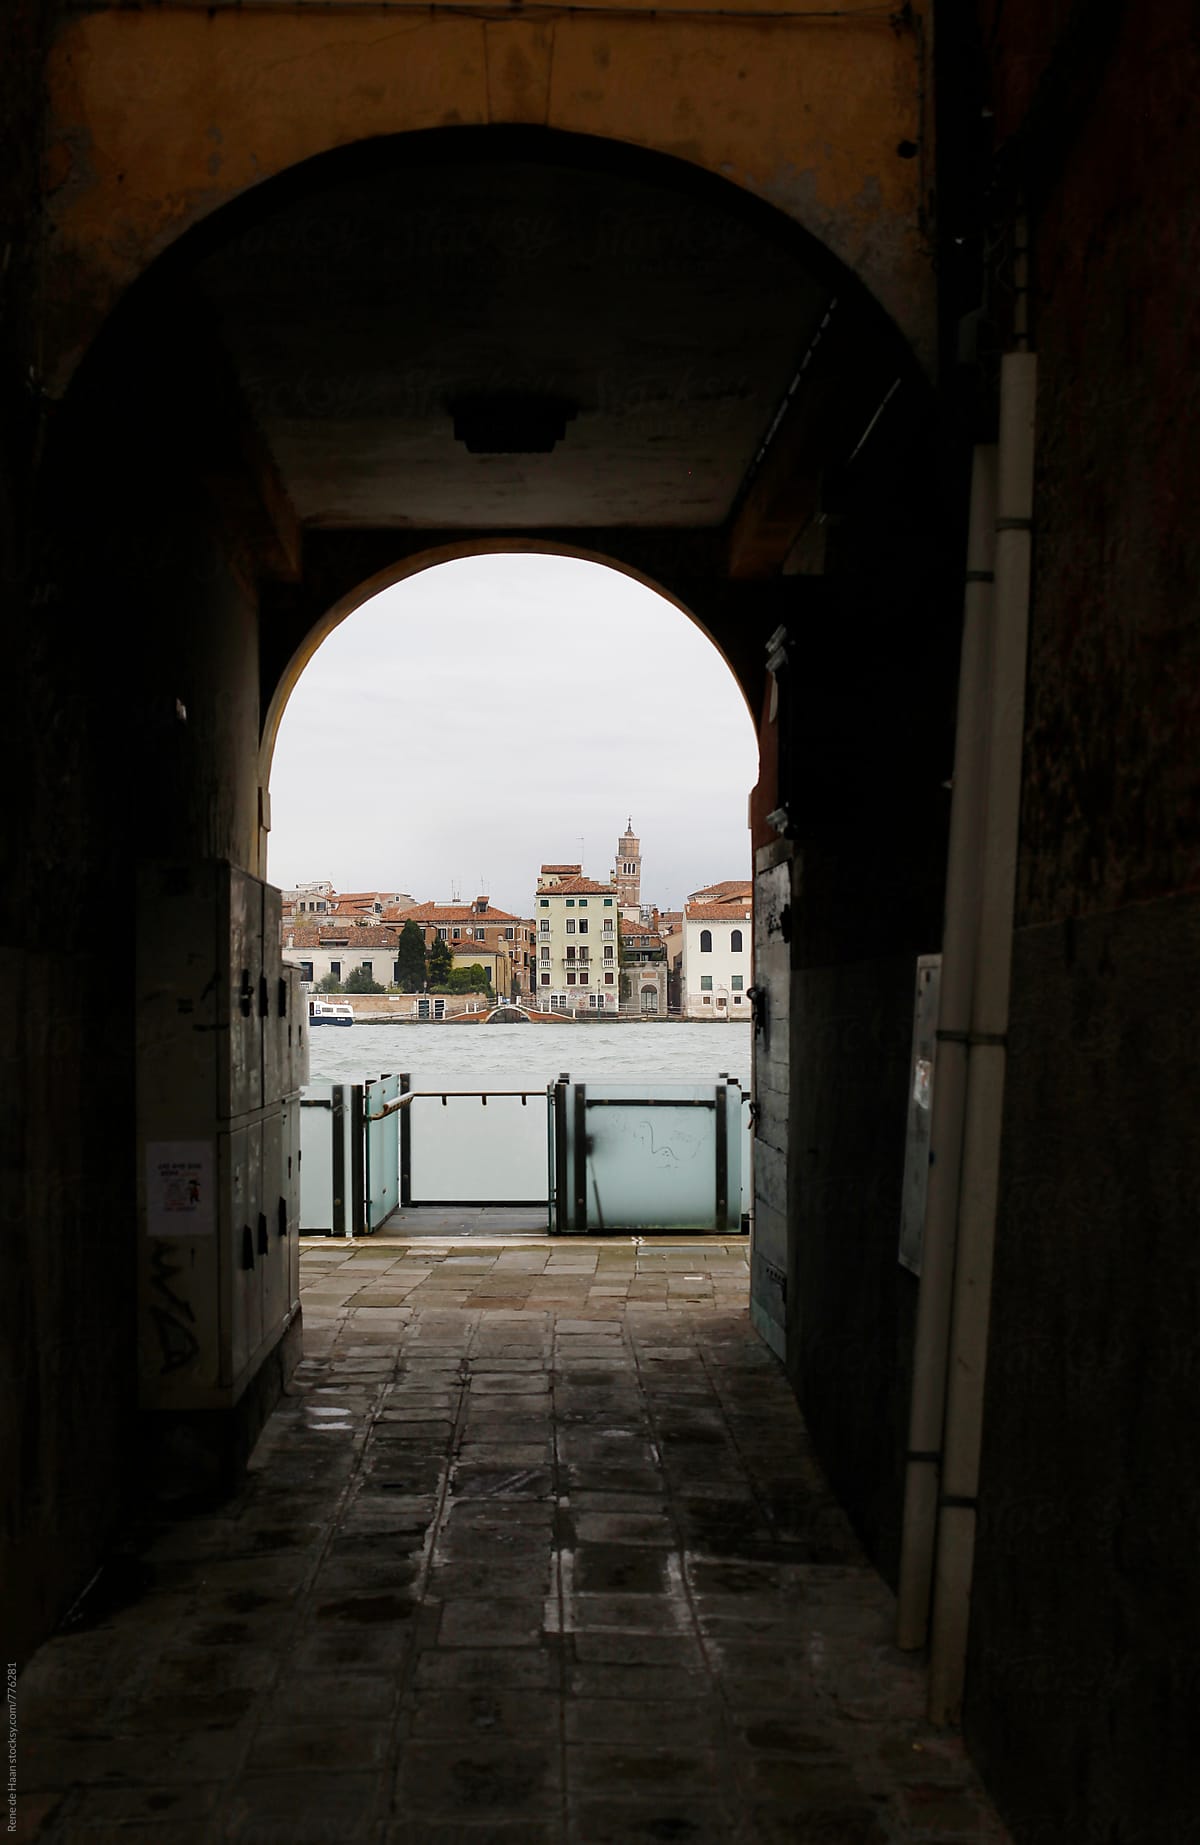 passageway with view on Venice, Italy